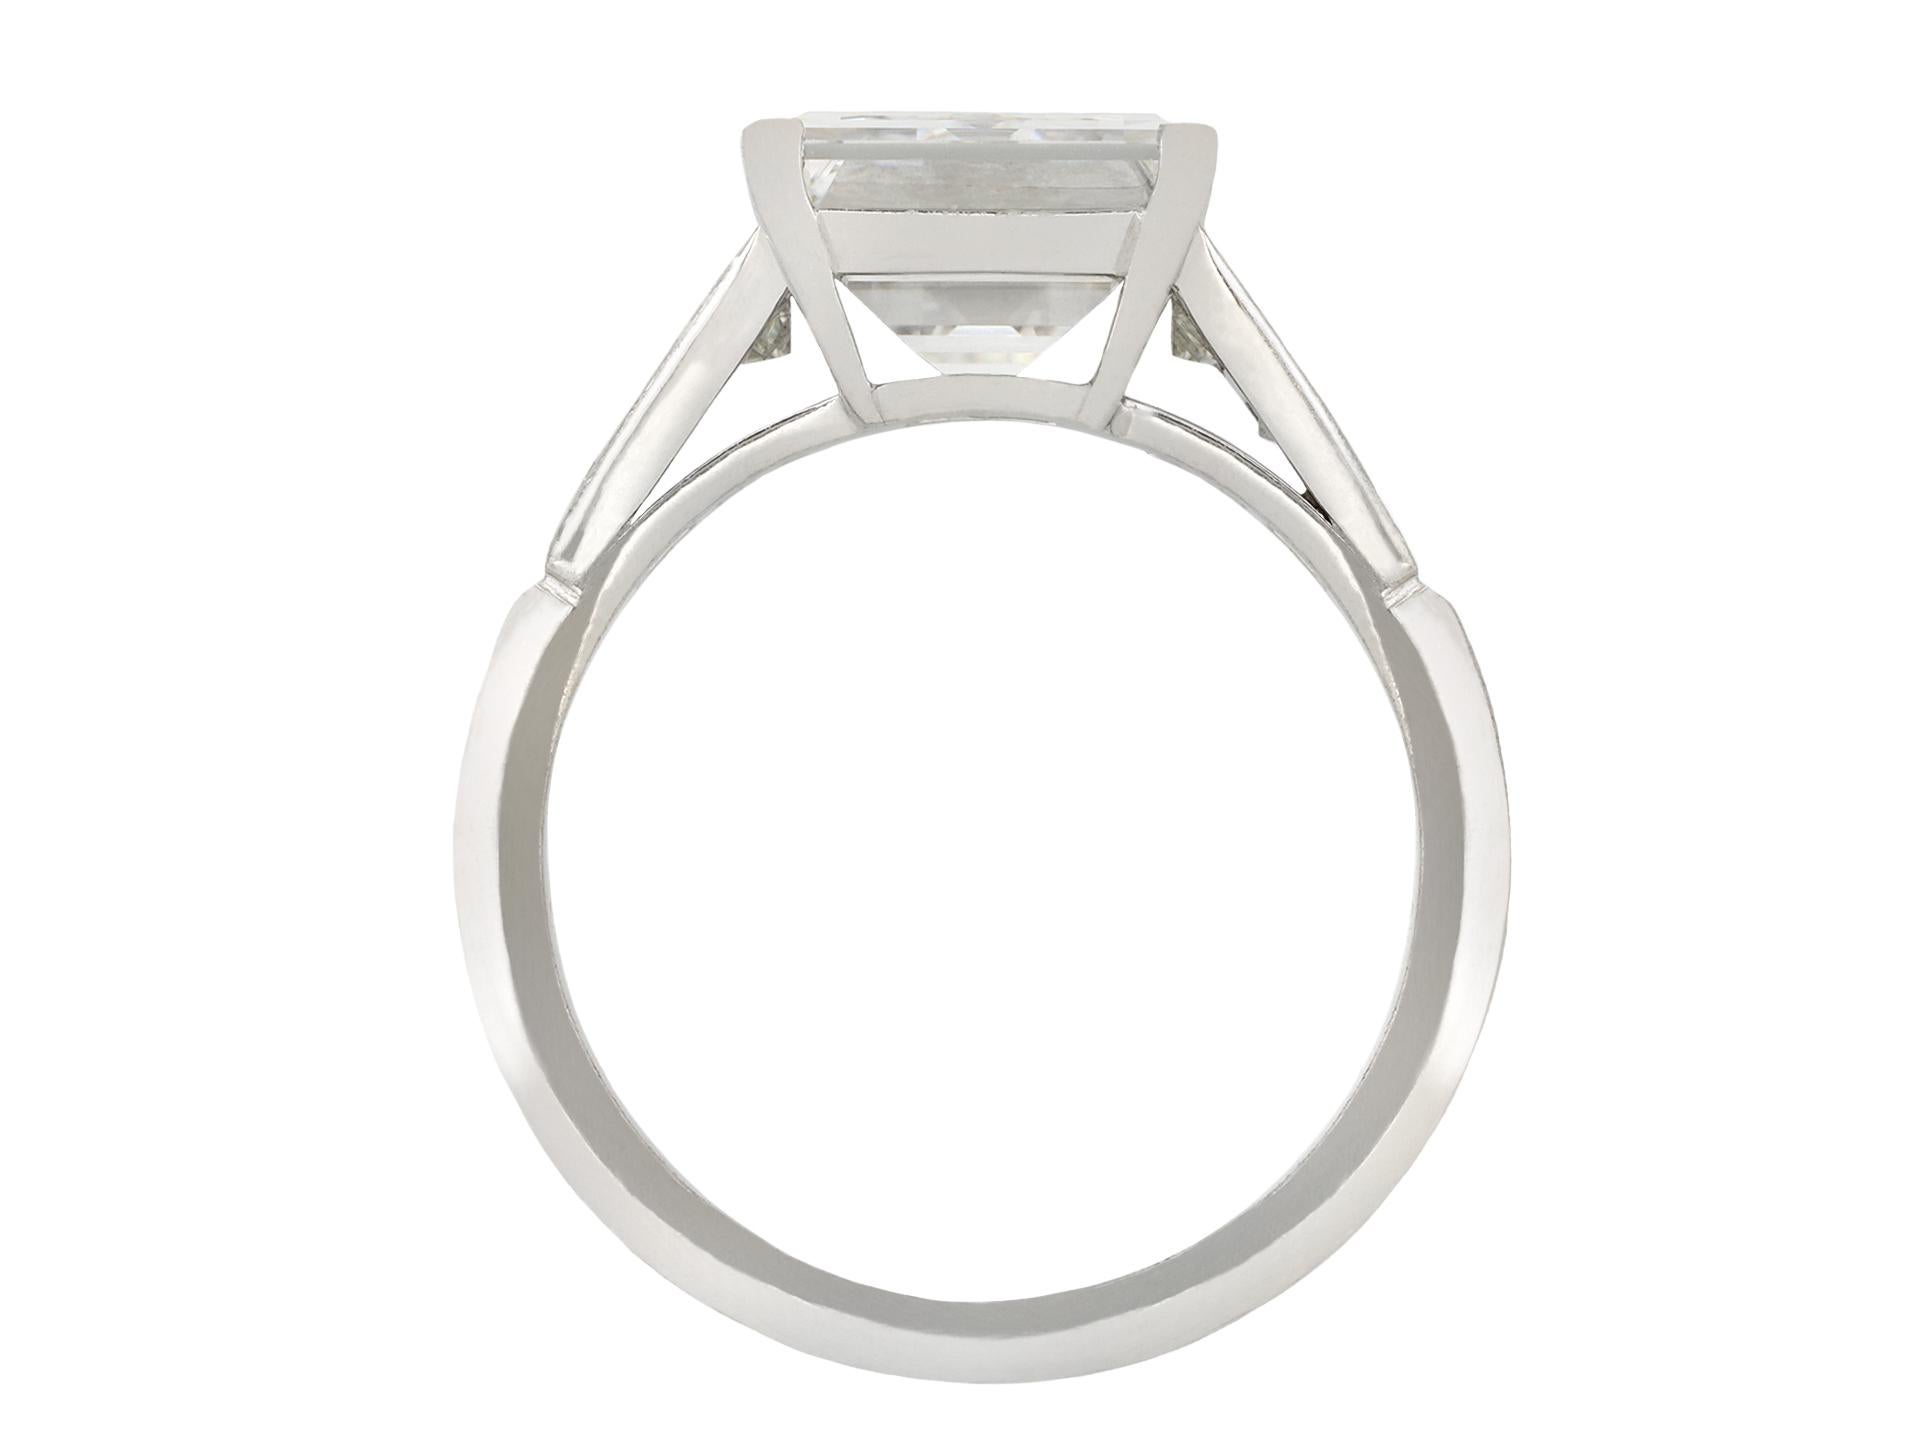 Emerald Cut Art Deco 4.38 Carat Step-Cut Diamond Flanked Solitaire Ring, circa 1930 For Sale